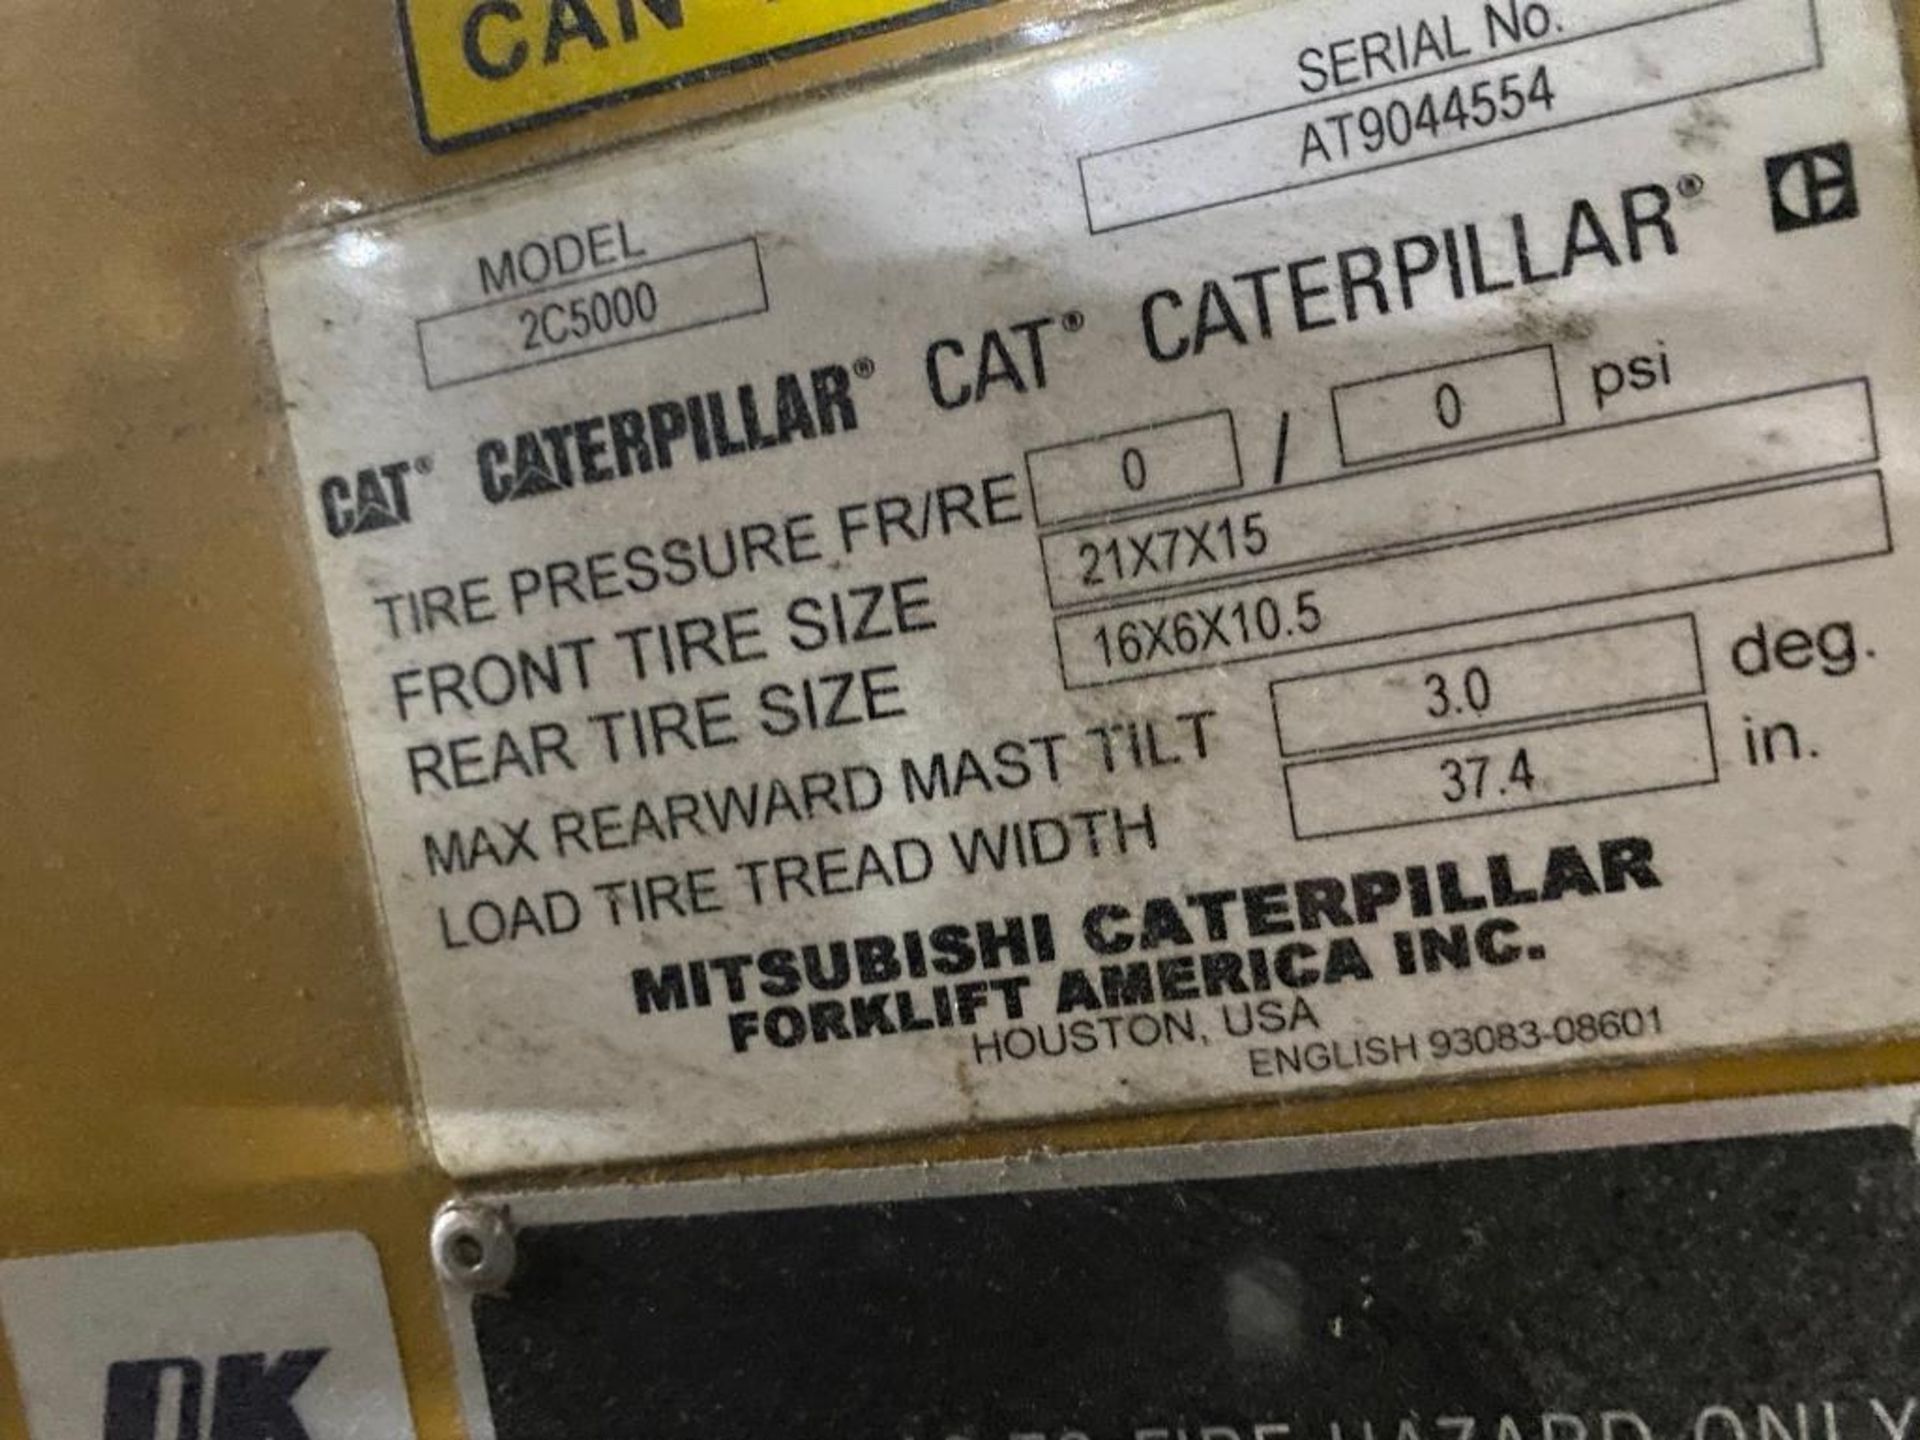 Caterpillar 2C5000 Forklift w/ Box Clamp, S/N AT9044554, 3-Stage Mast, Solid Non-Marking Tires, LP G - Image 5 of 7